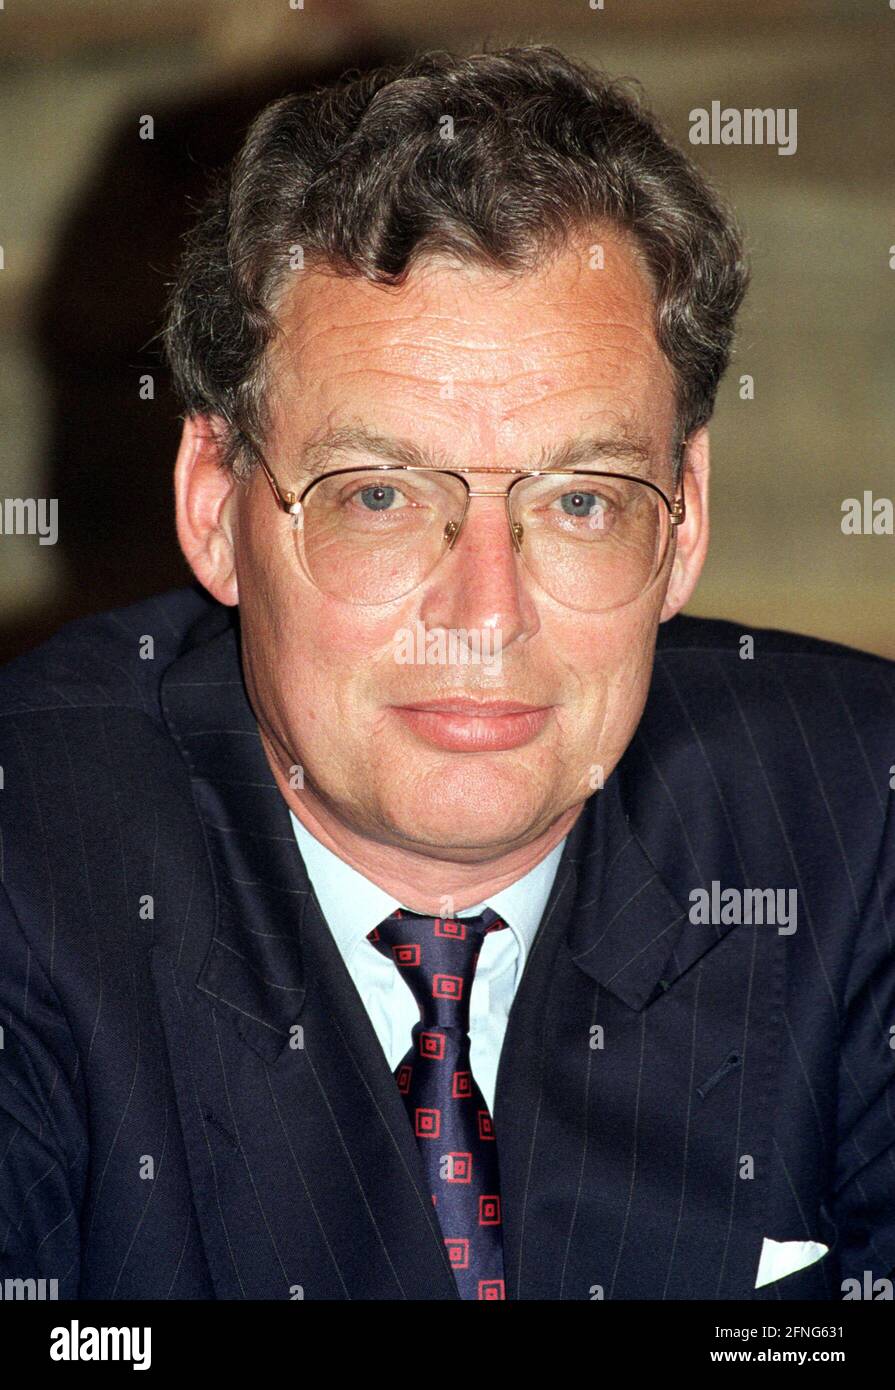 Gerhard CROMME , Chairman of the Executive Board of Fried. Krupp AG Hoesch-Krupp , 06.05.1998 [automated translation] Stock Photo